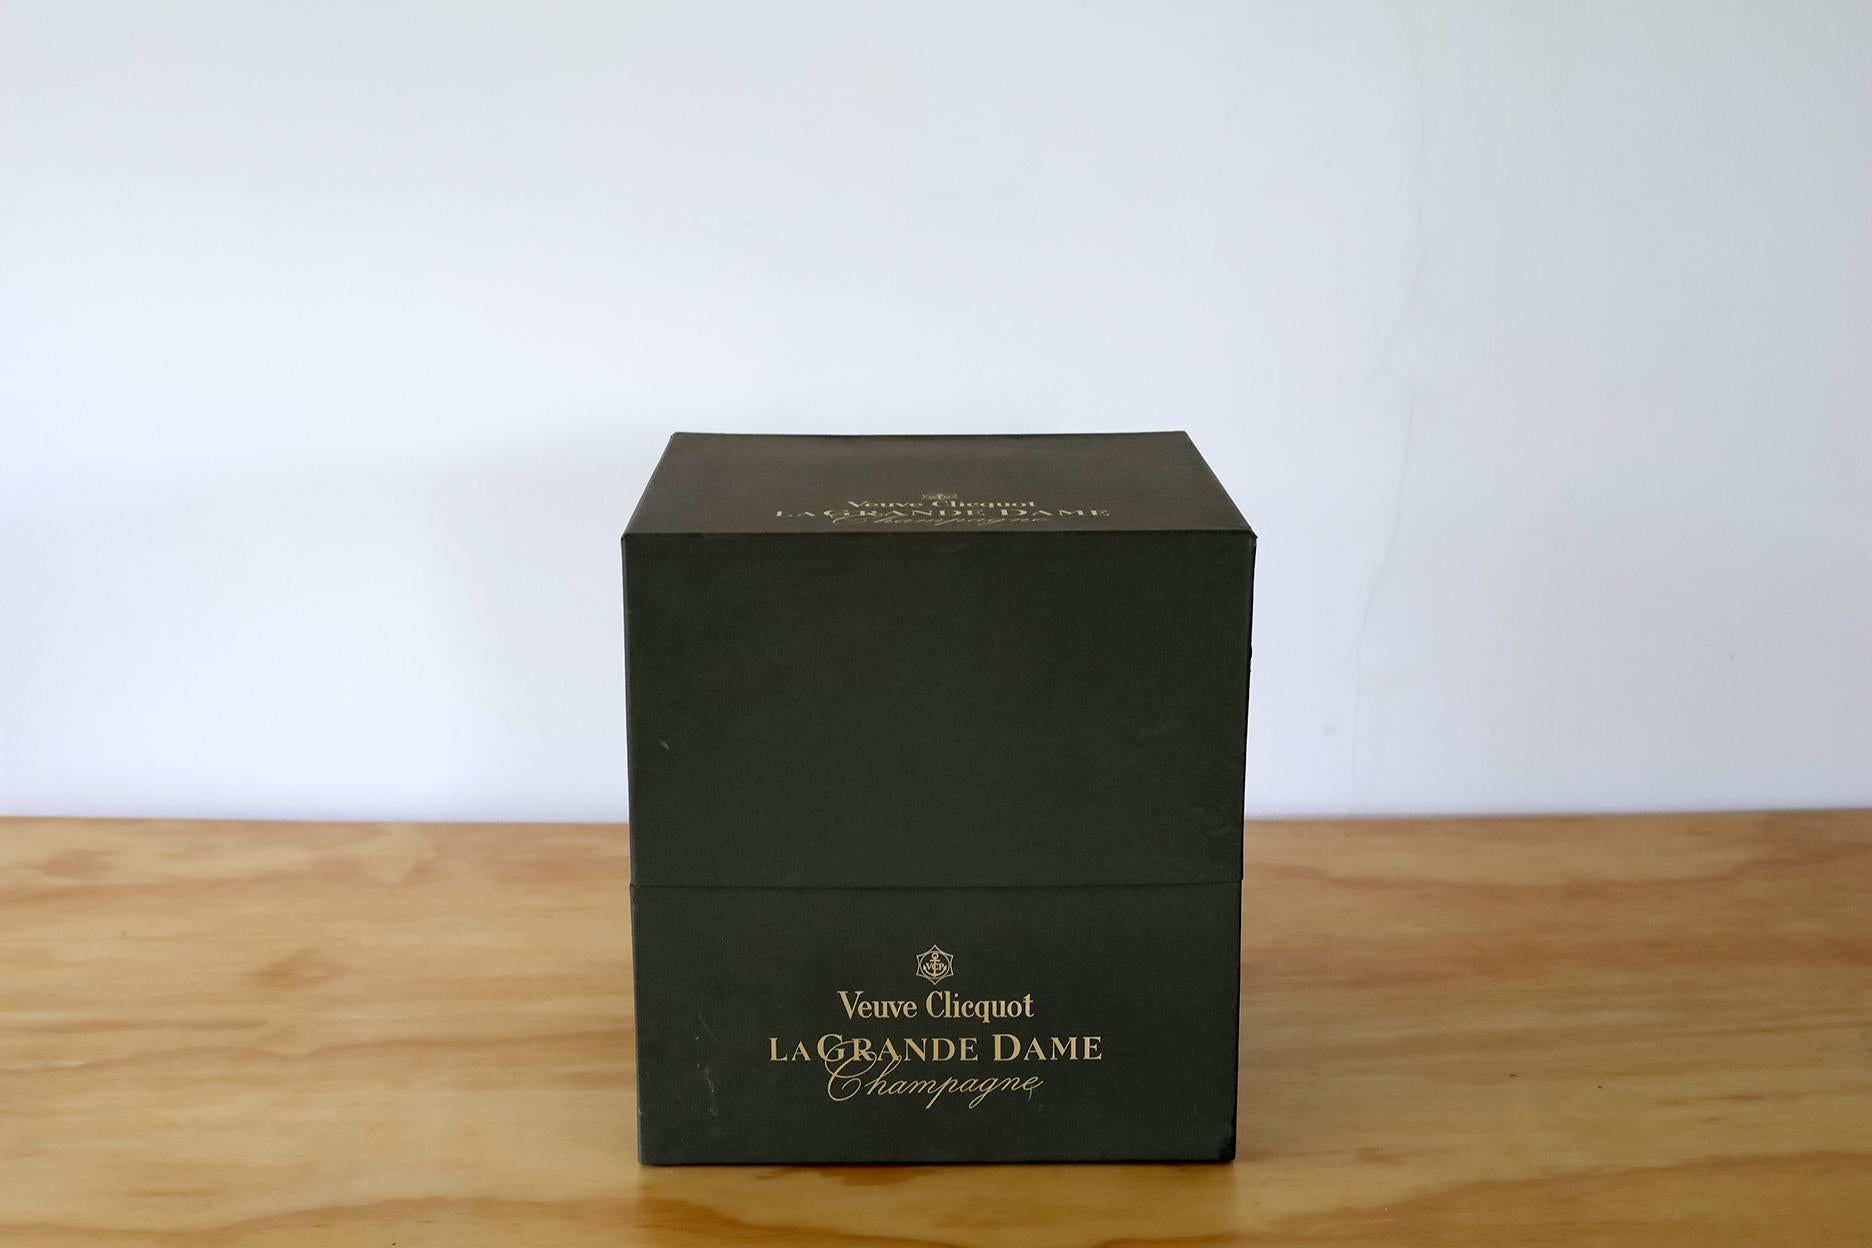 Very rare crystal champagne cooler in the shape of an egg by the legendary Champagne House VEUVE CLICQUOT.
It can hold various bottles. Comes with original box.
Perfect condition. 
Made of crystal and metal (most likely bronze).